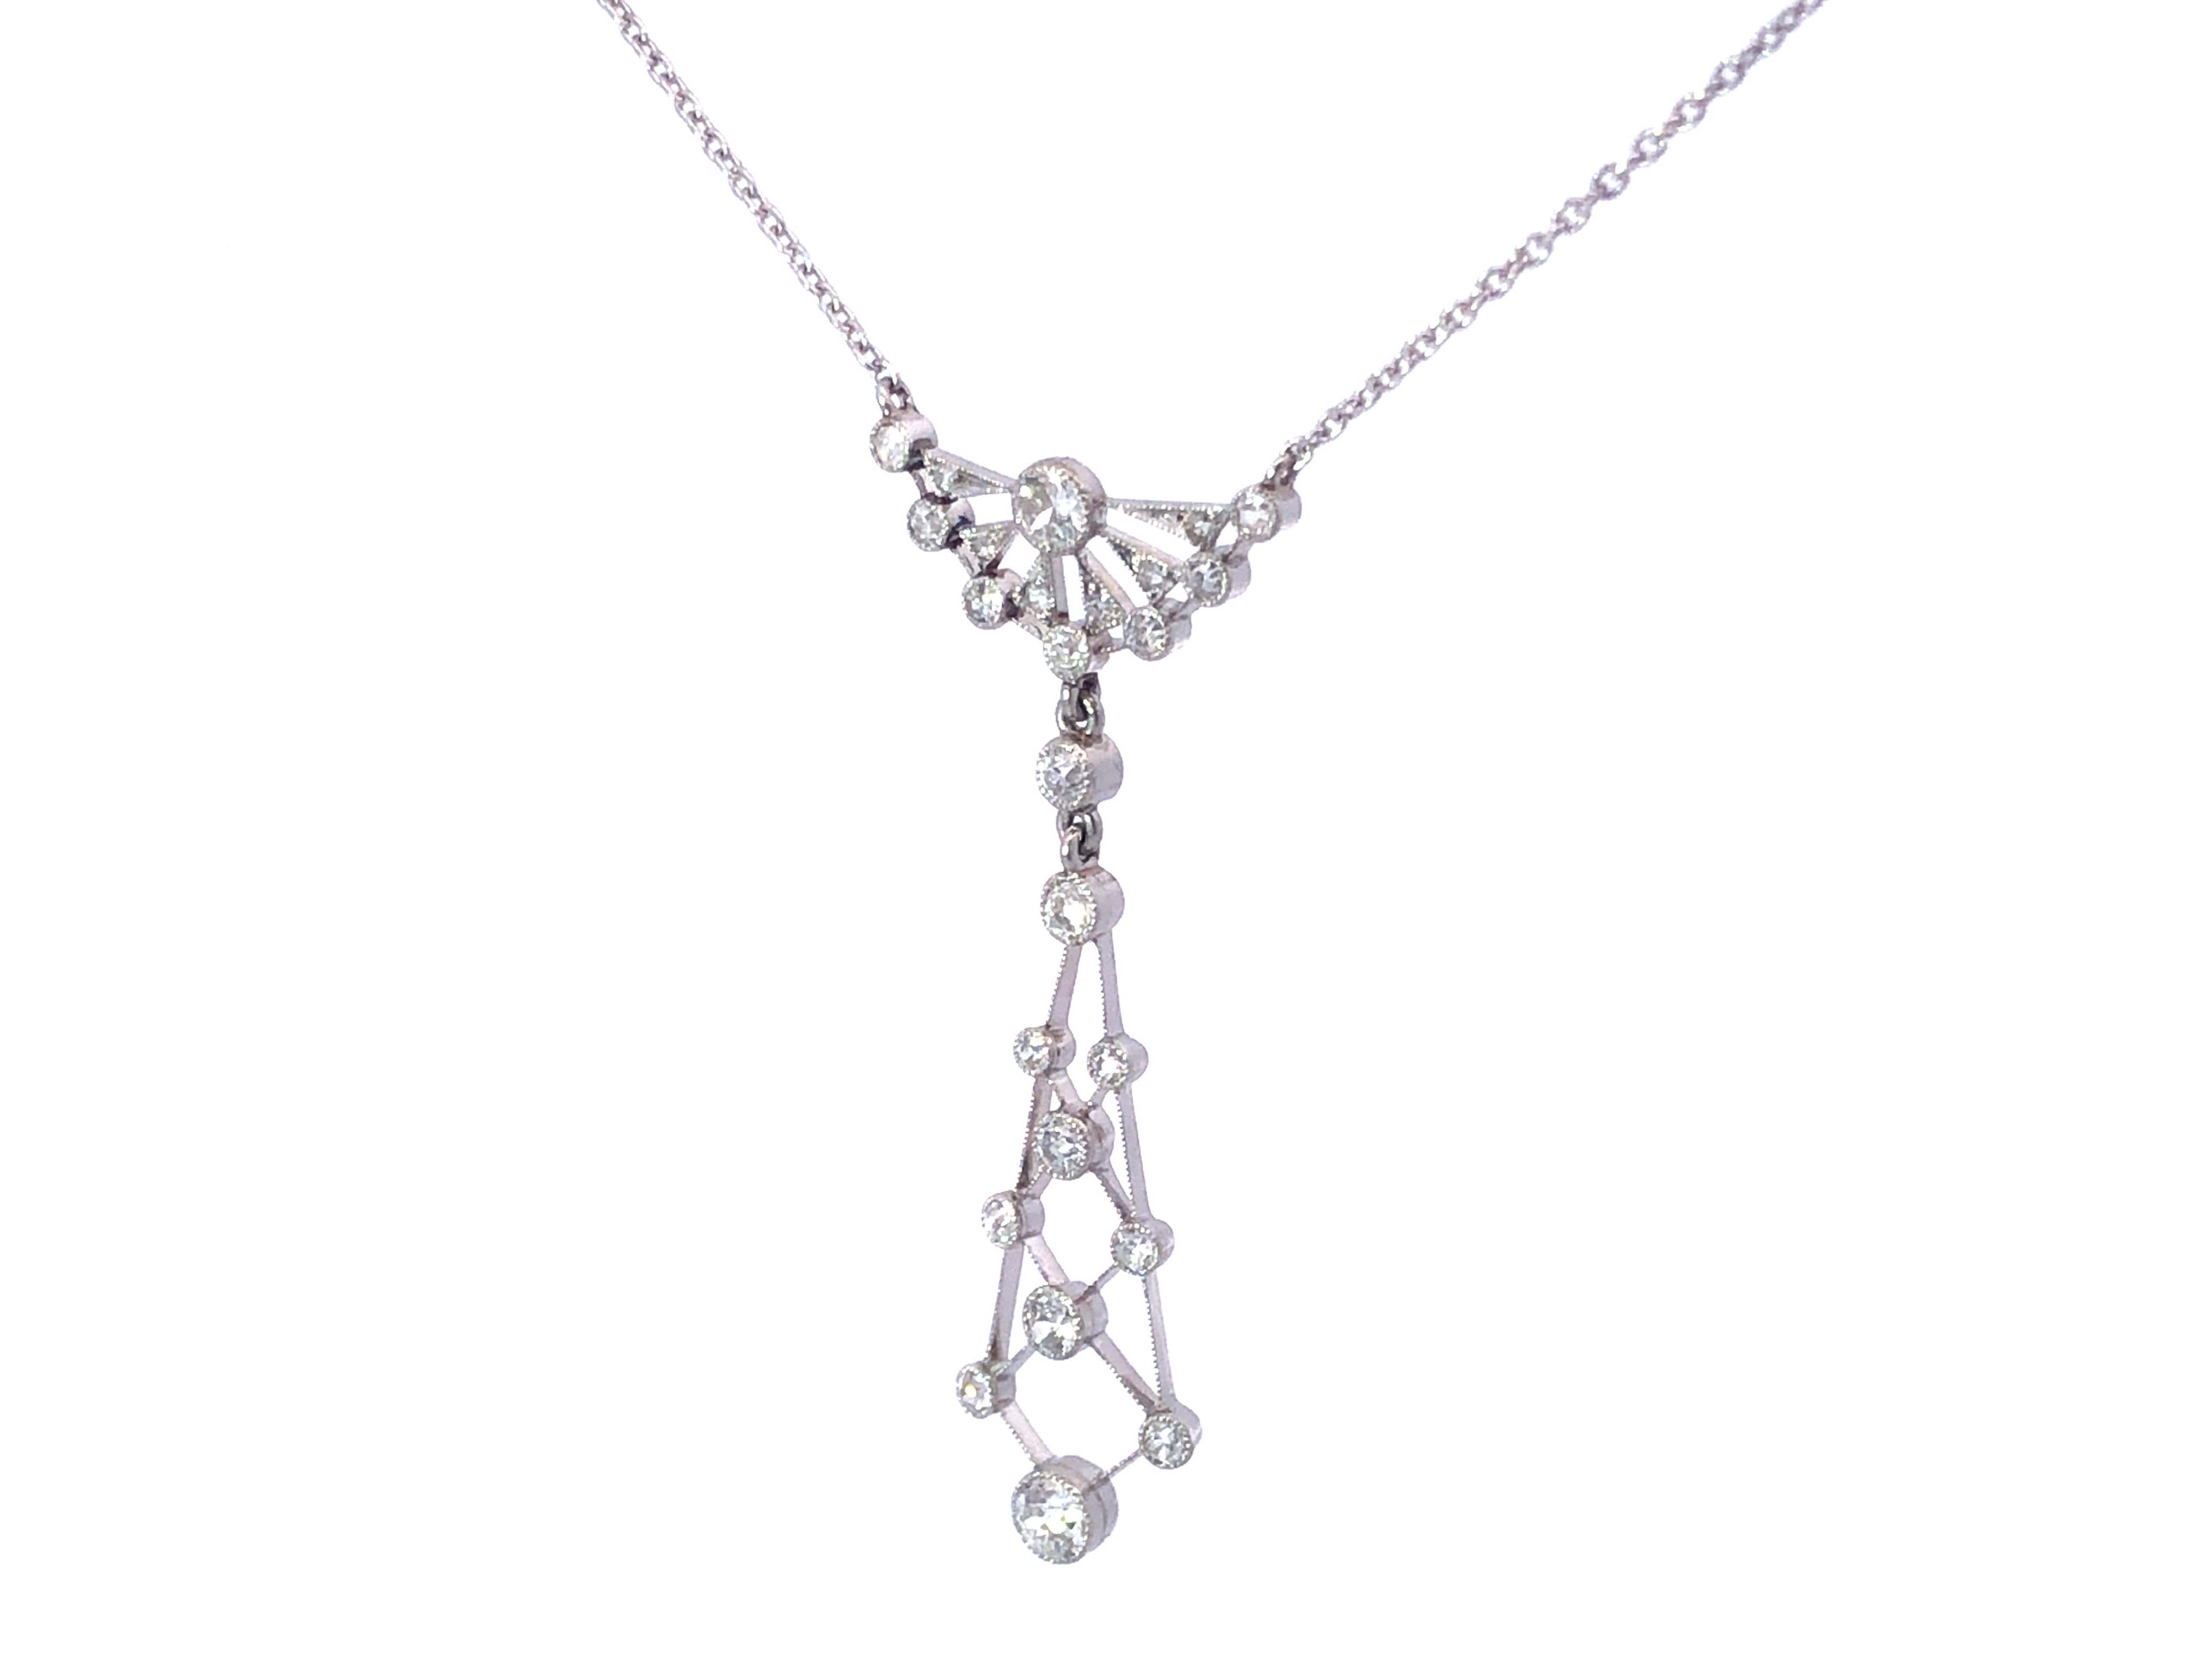 Art Deco Dangly Diamond Necklace in Platinum In Excellent Condition For Sale In Honolulu, HI